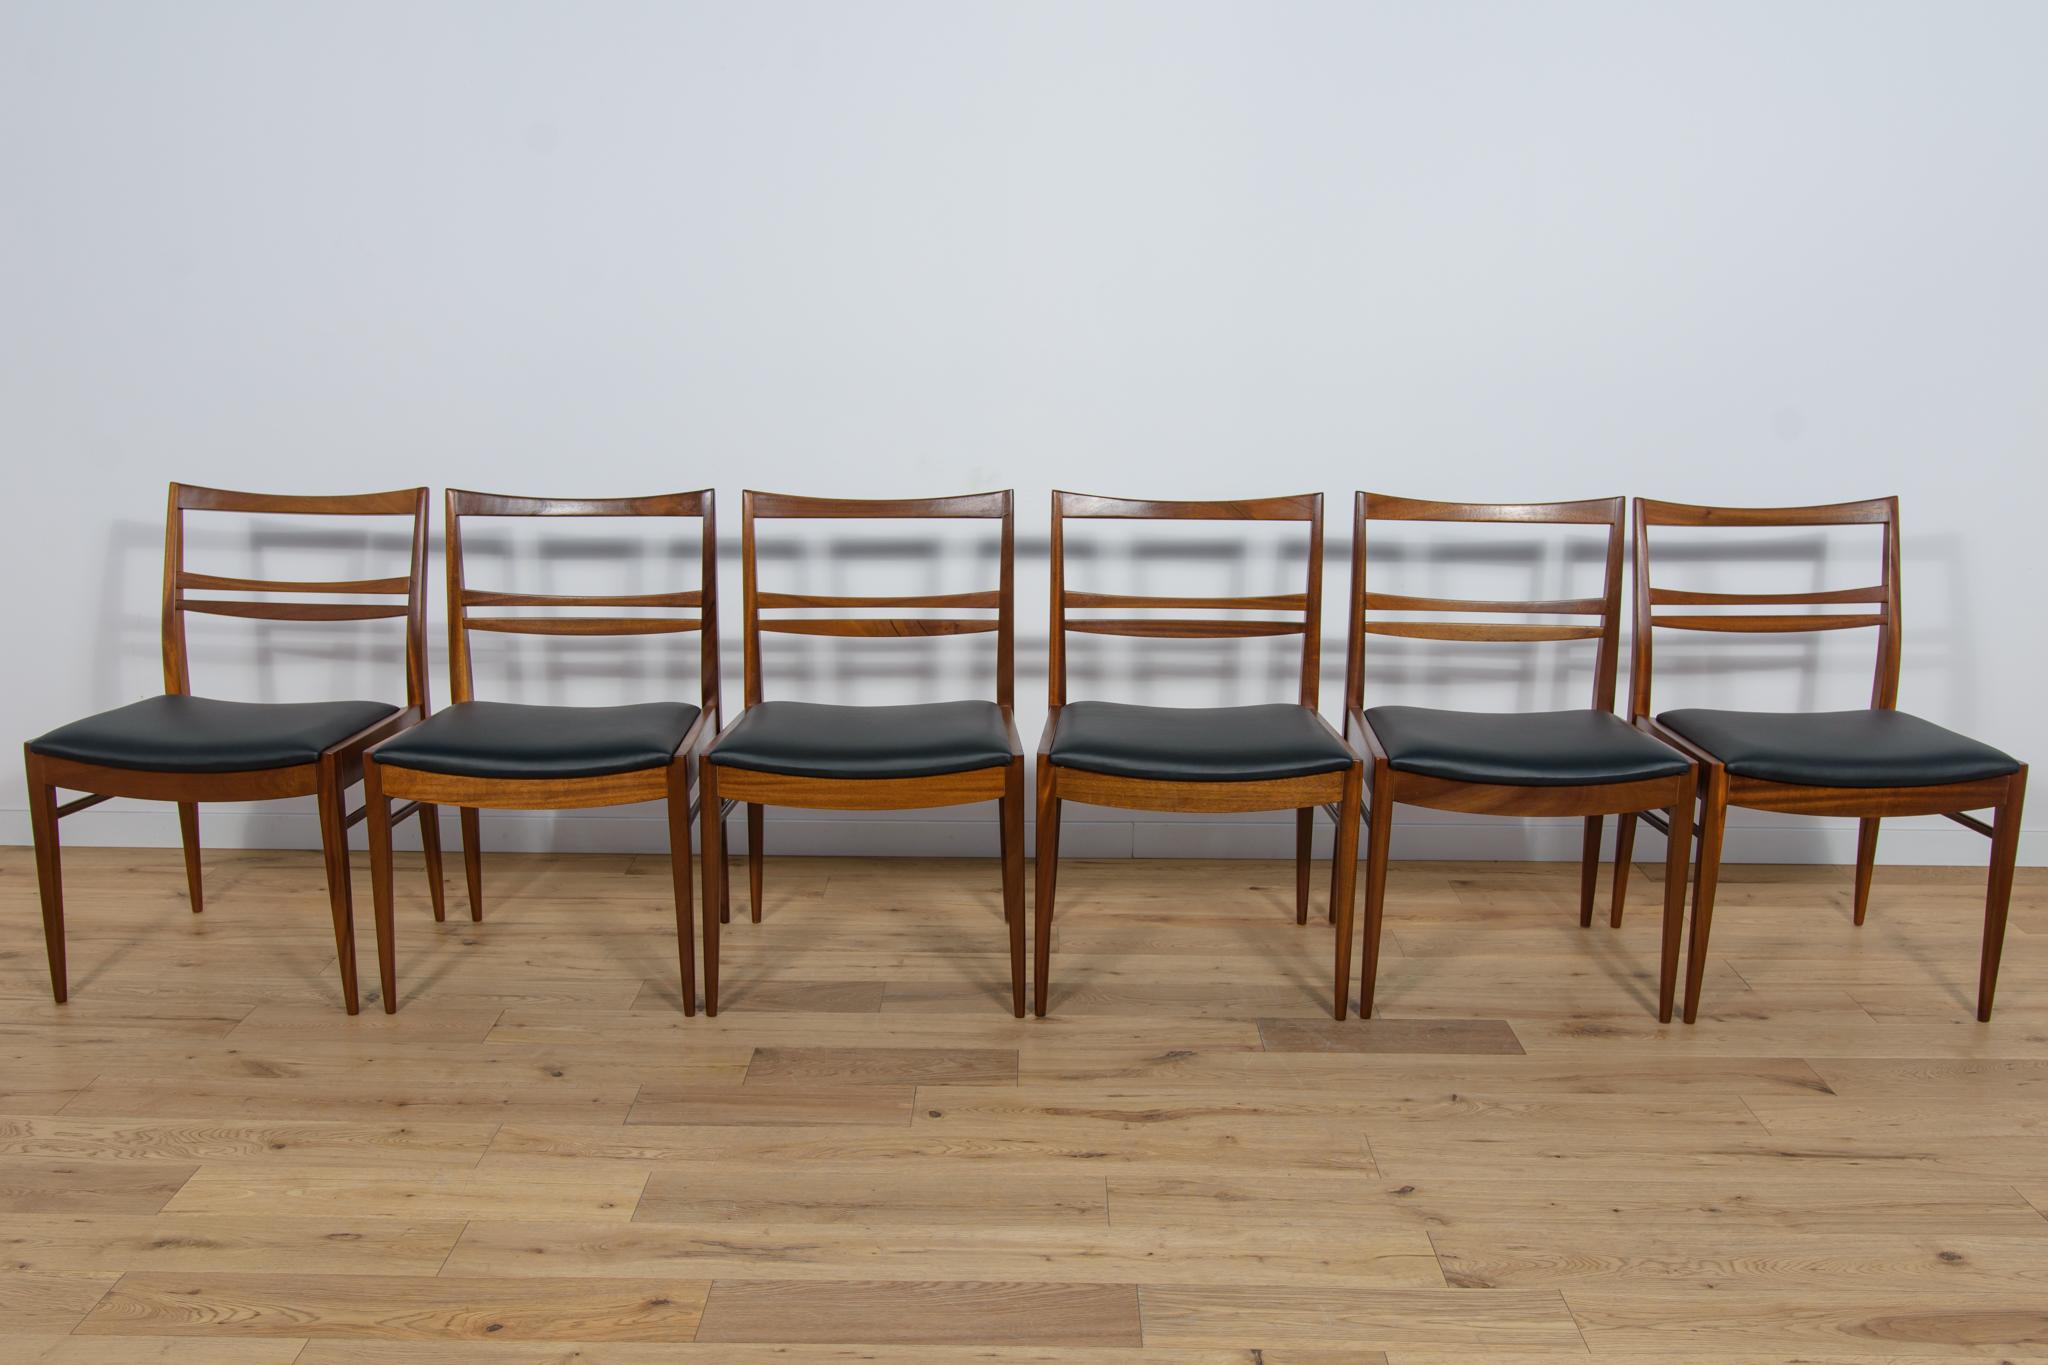 These six dining chairs were made in the United Knigdom during the 1960s. Elegant teak chairs with an interesting, light form. The teak elements have been cleaned and polished with Danish Oil. The foams have been replaced and covered with